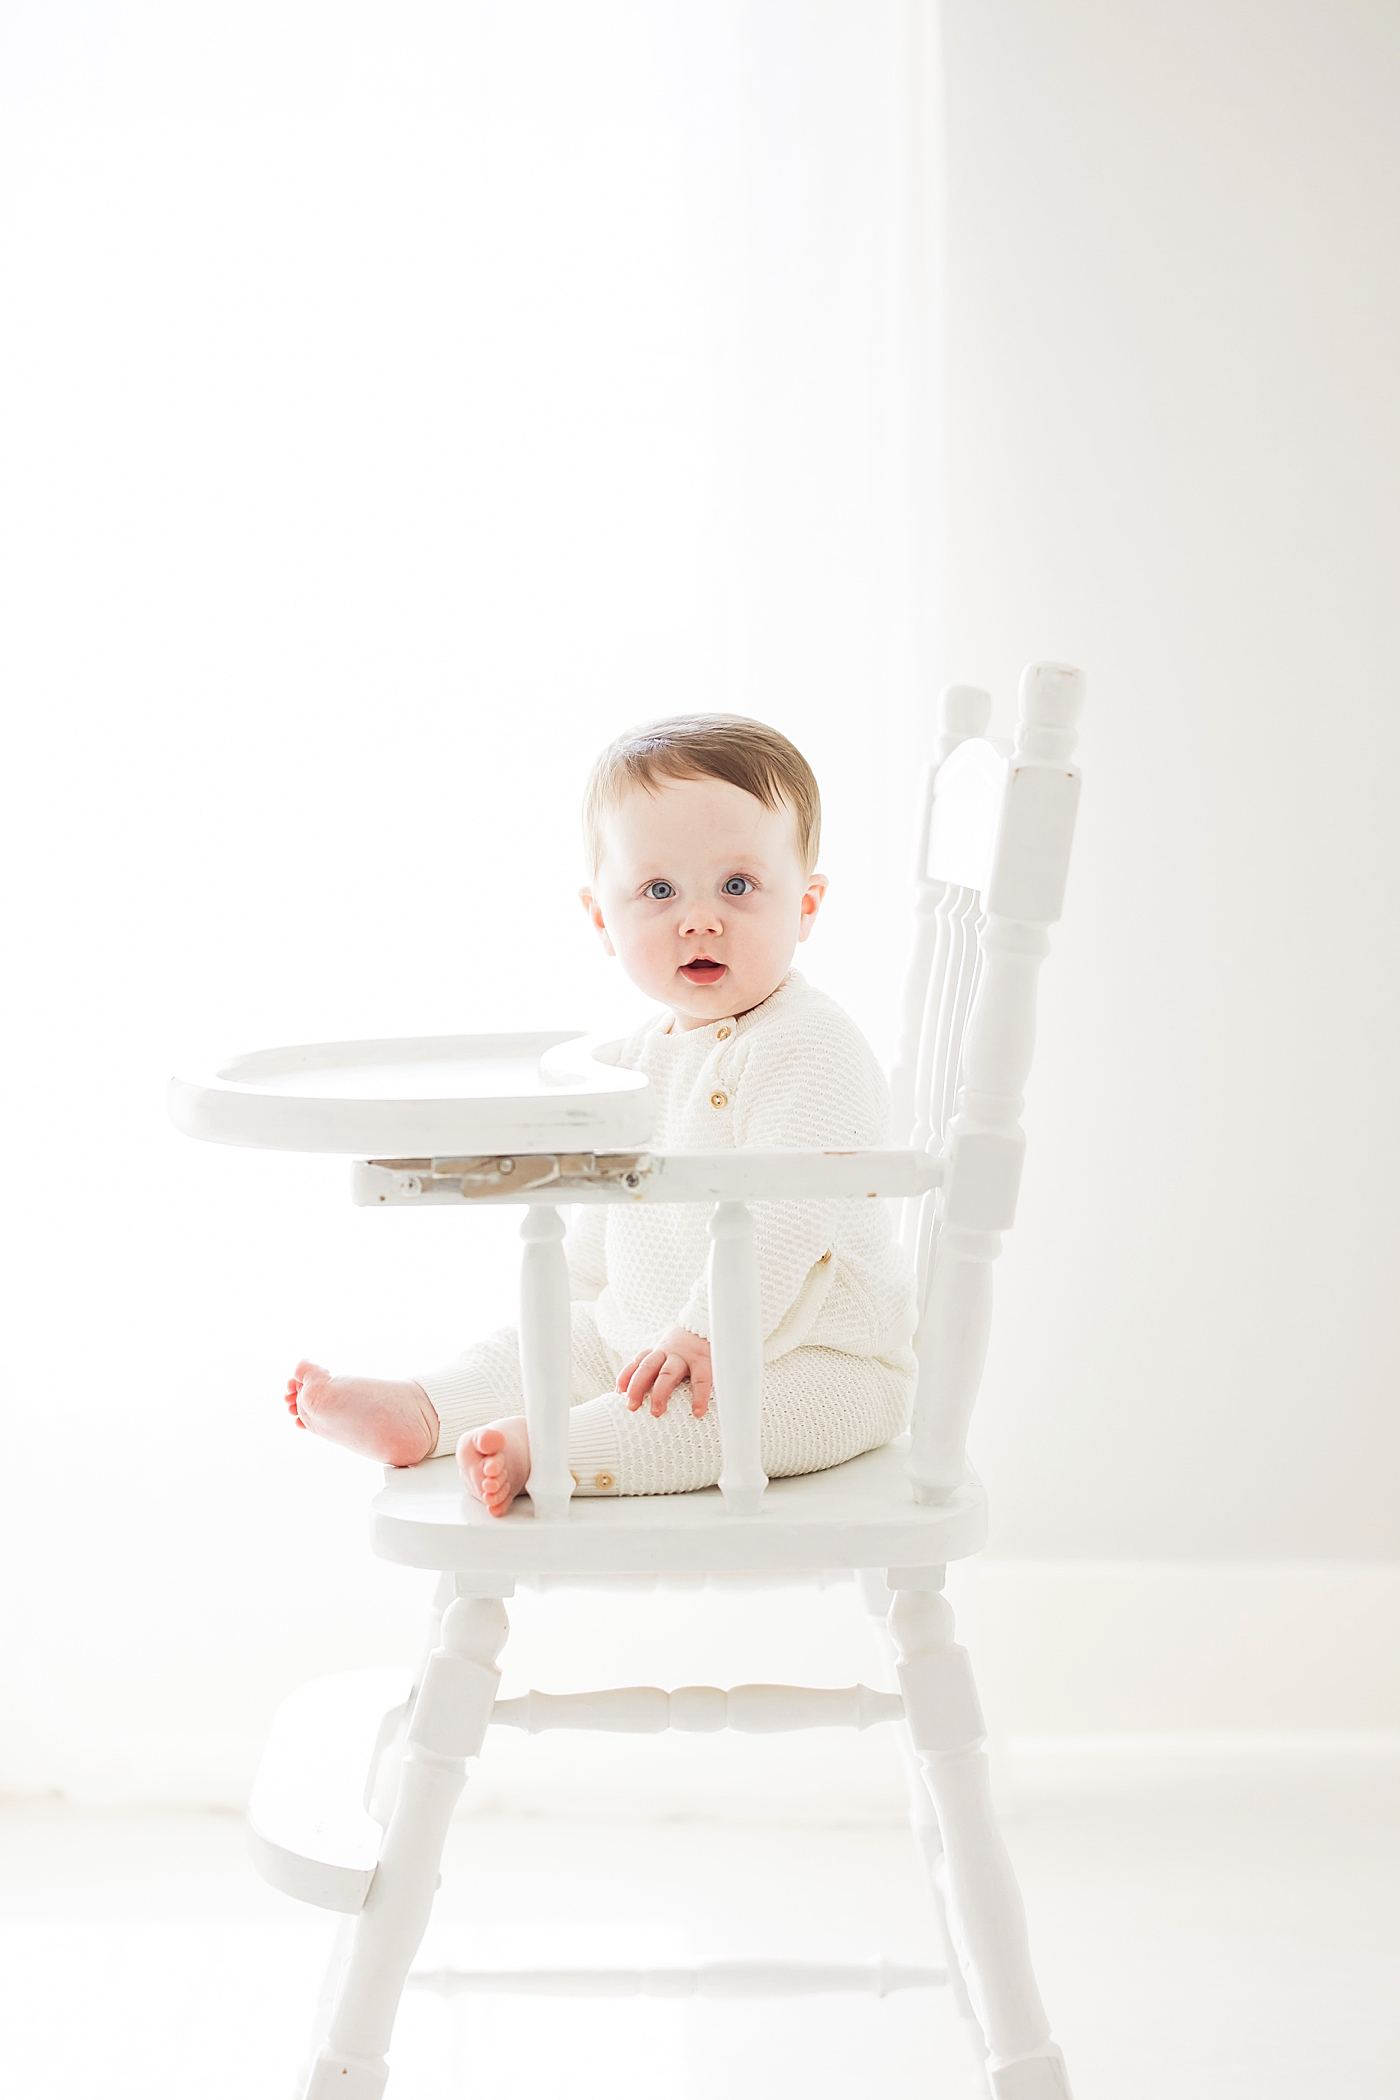 Six month old sitter milestone session. Photo by Fresh Light Photography